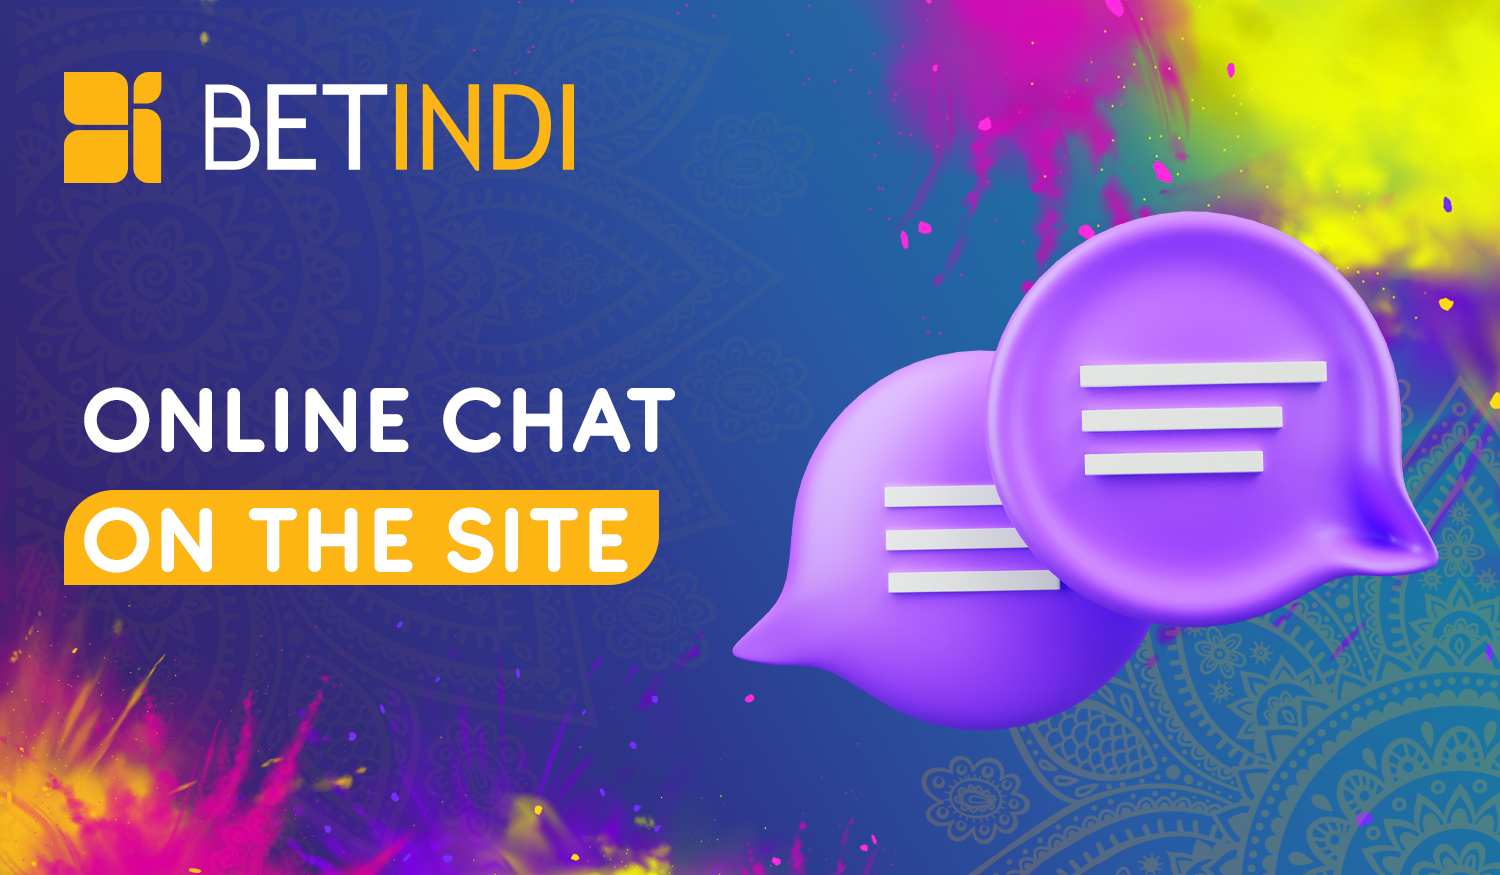 Step-by-step instructions on how to ask Betindi support via Live Chat